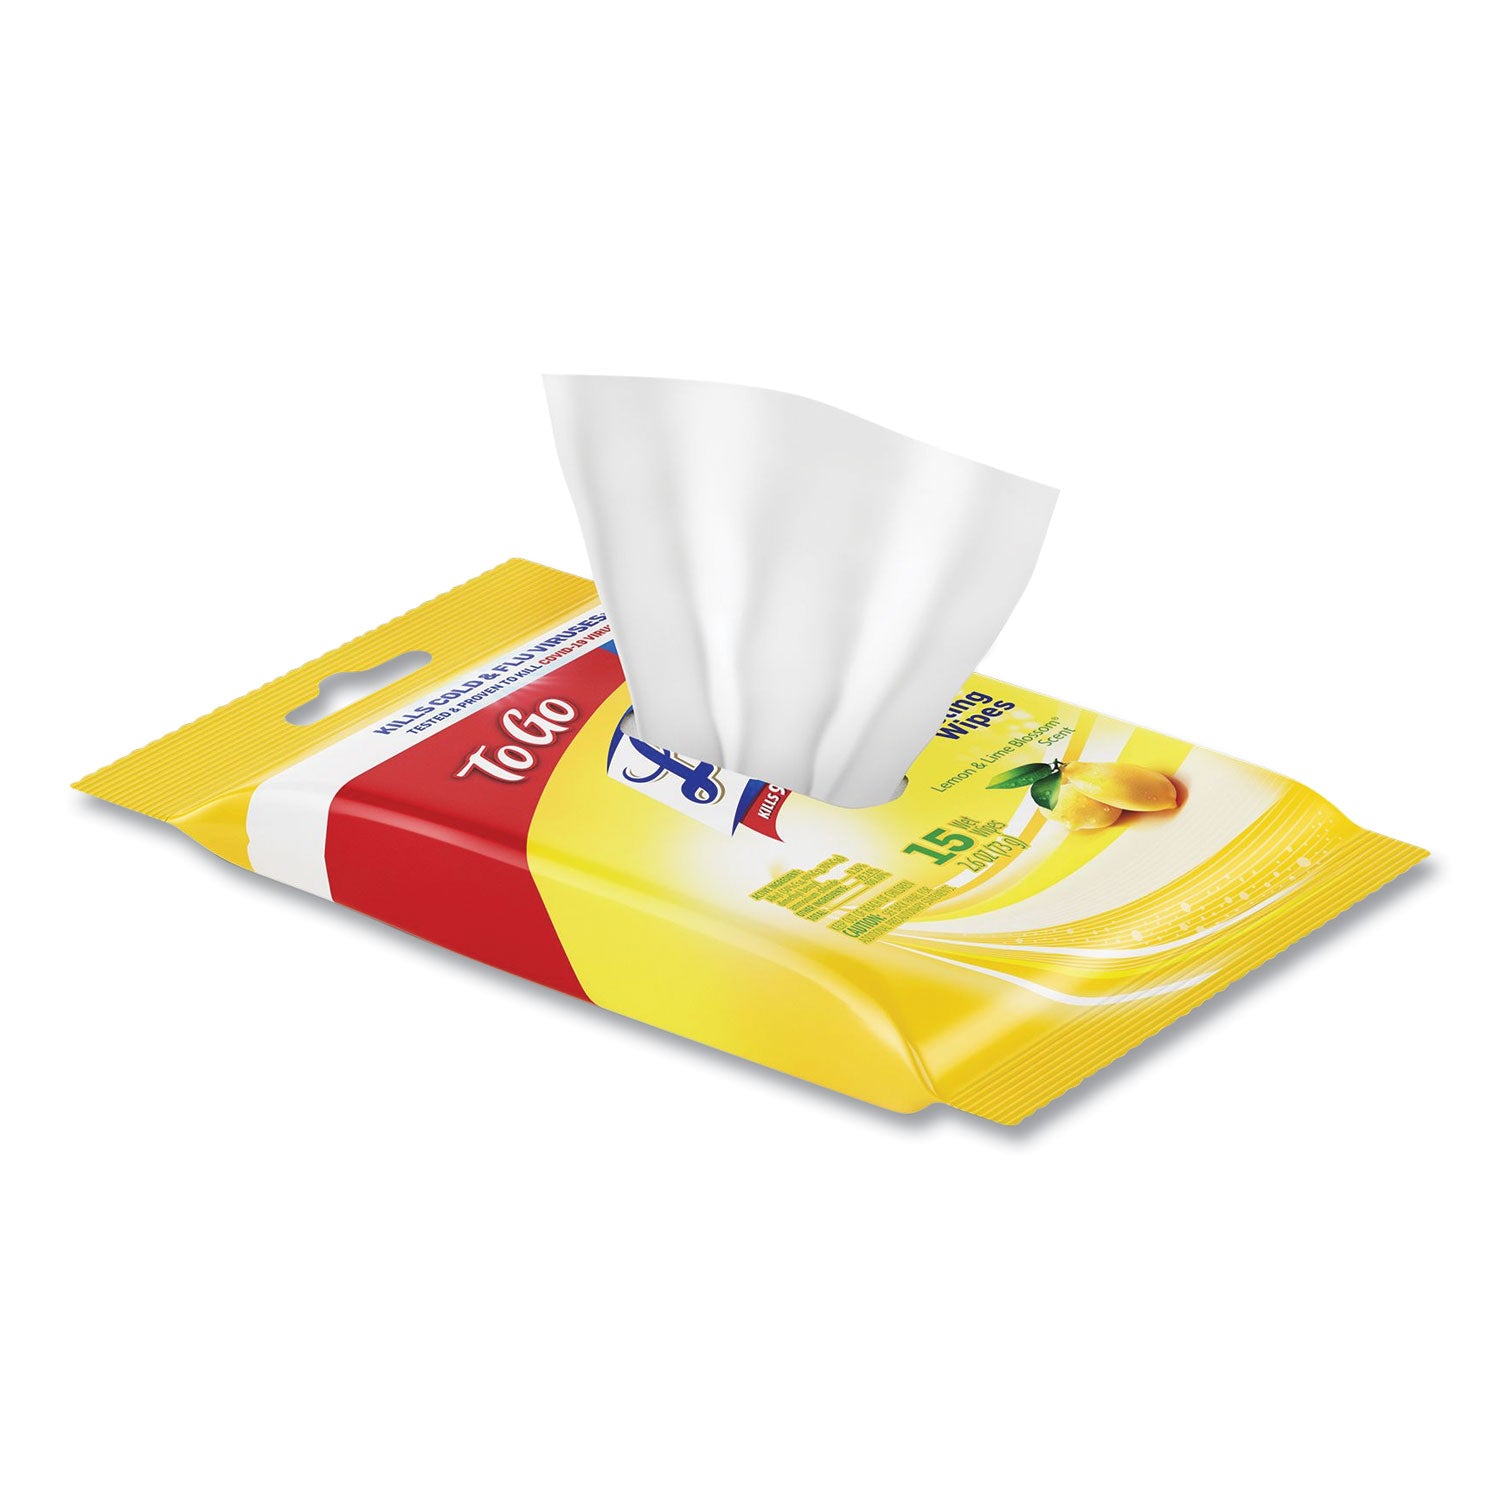 disinfecting-wipes-flatpacks-1-ply-669-x-787-lemon-and-lime-blossom-white-15-wipes-flat-pack-24-flat-packs-carton_rac99799ct - 3